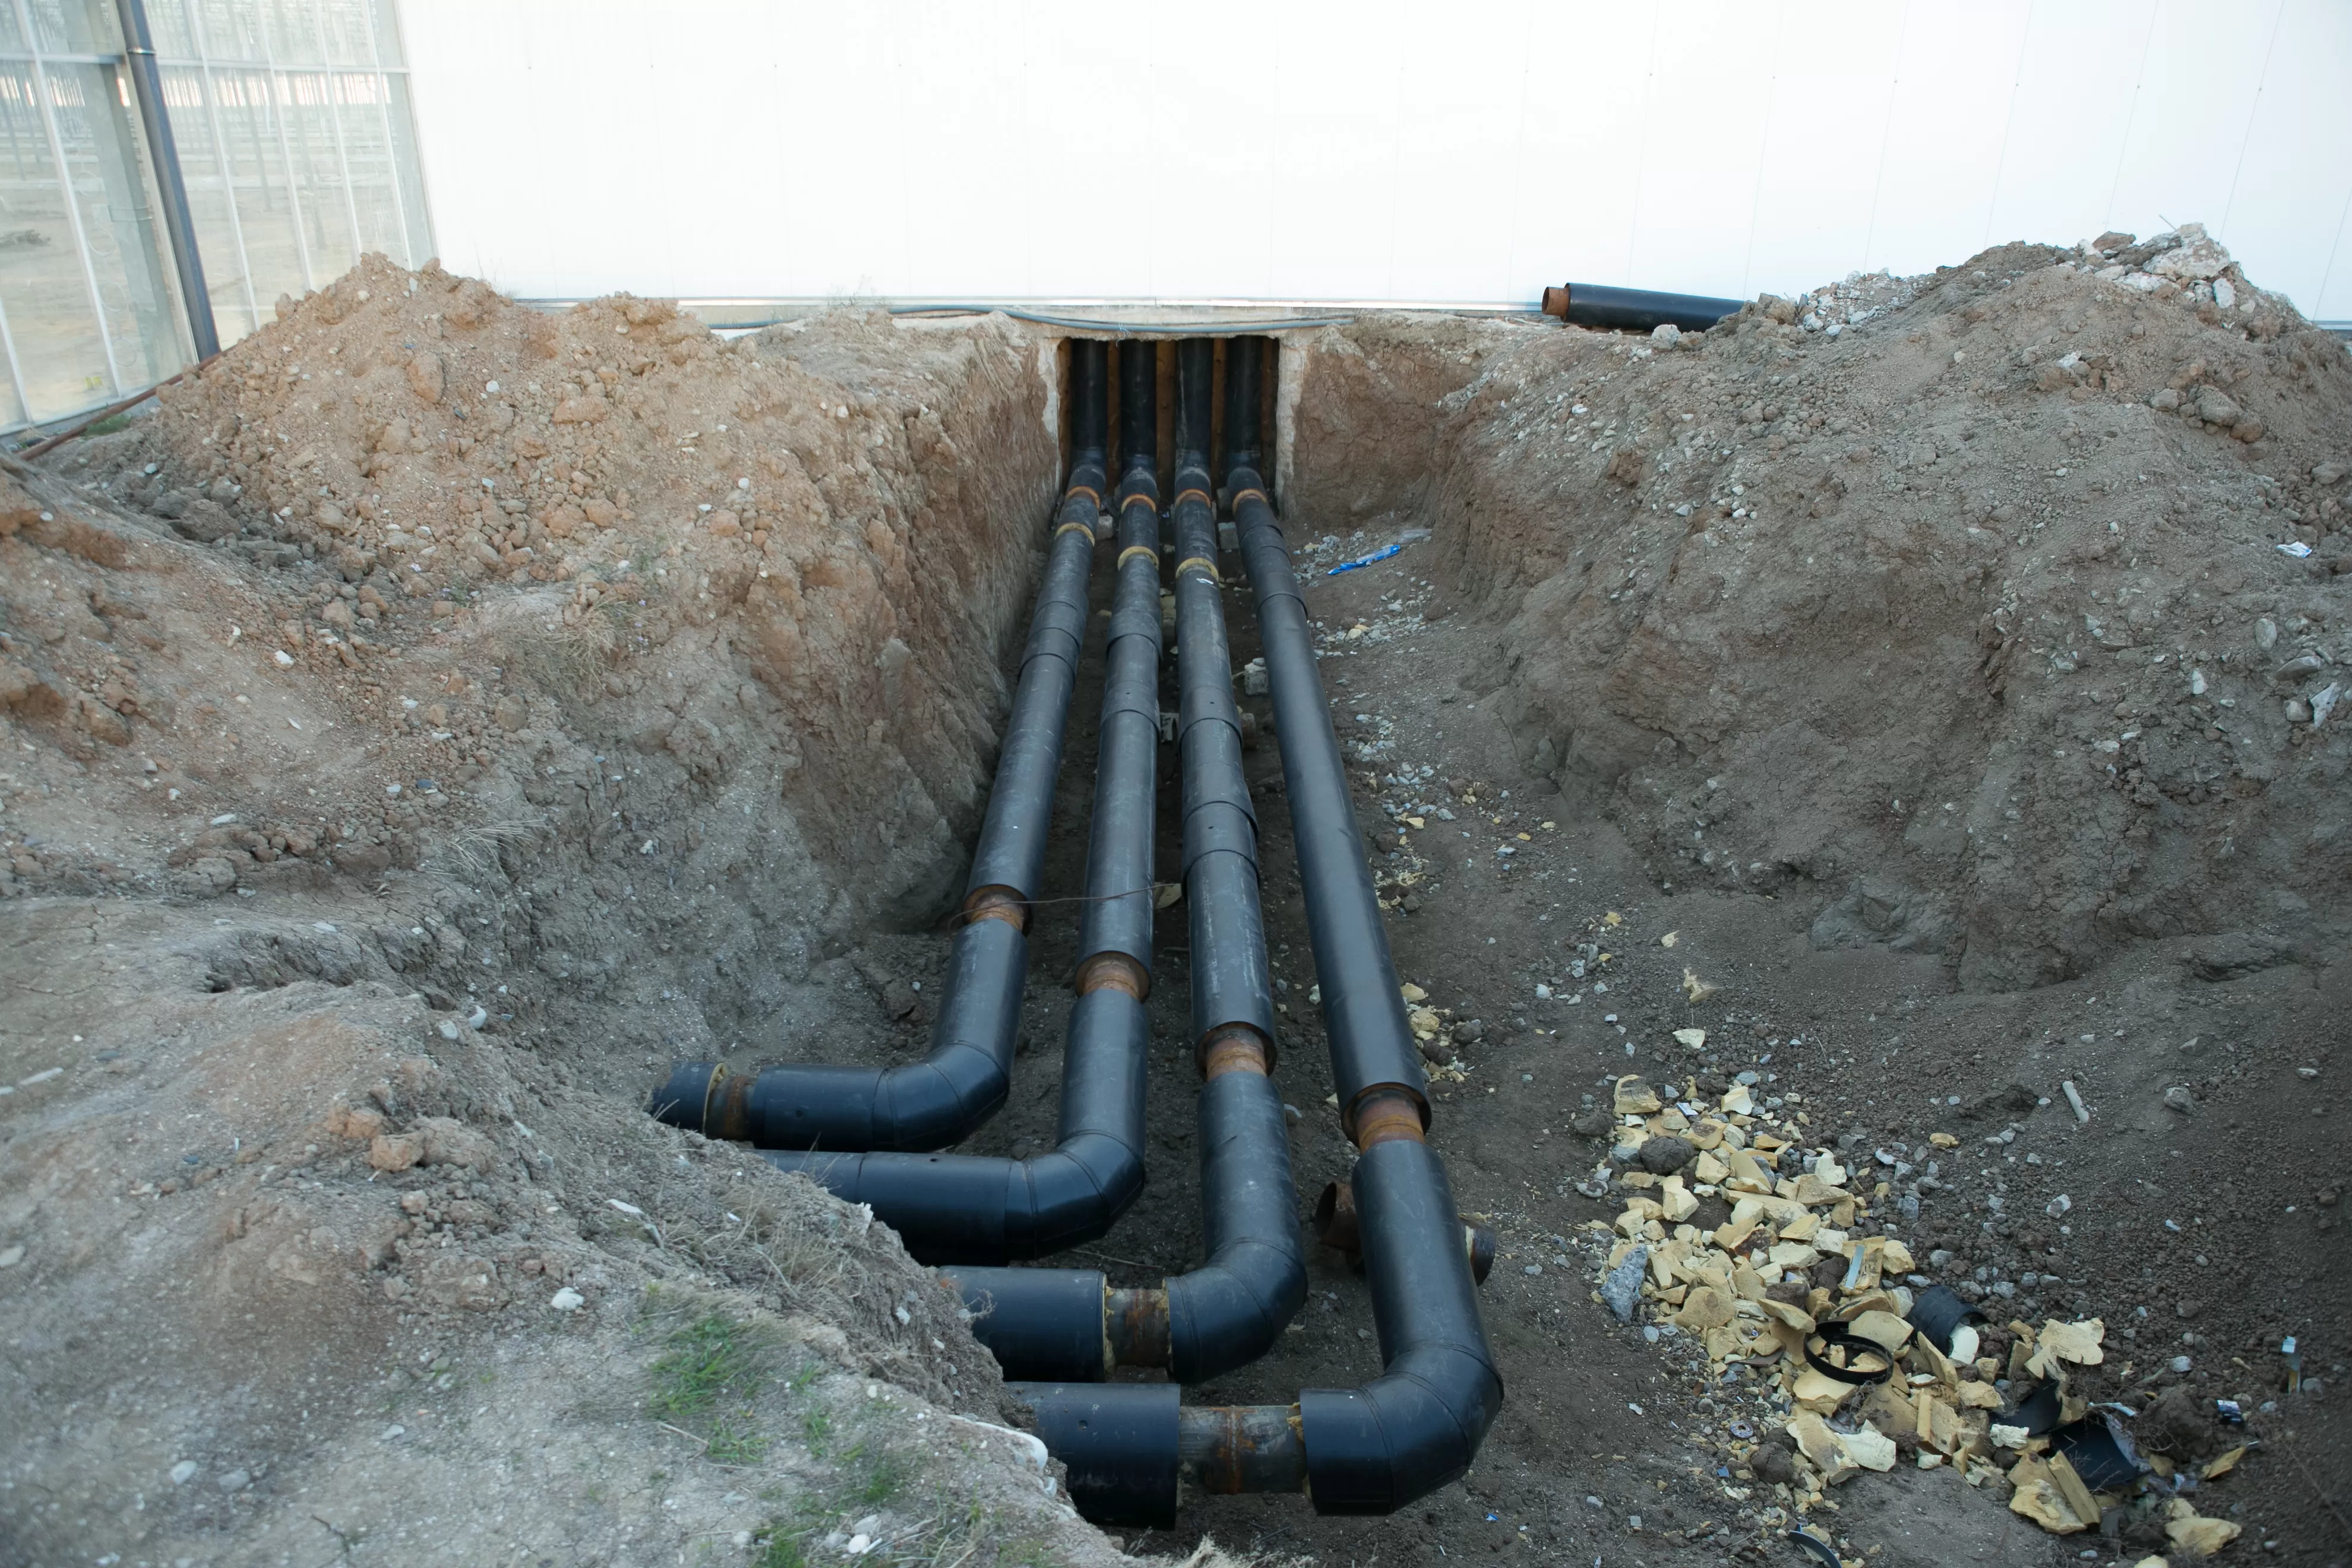 Laying of heating lines